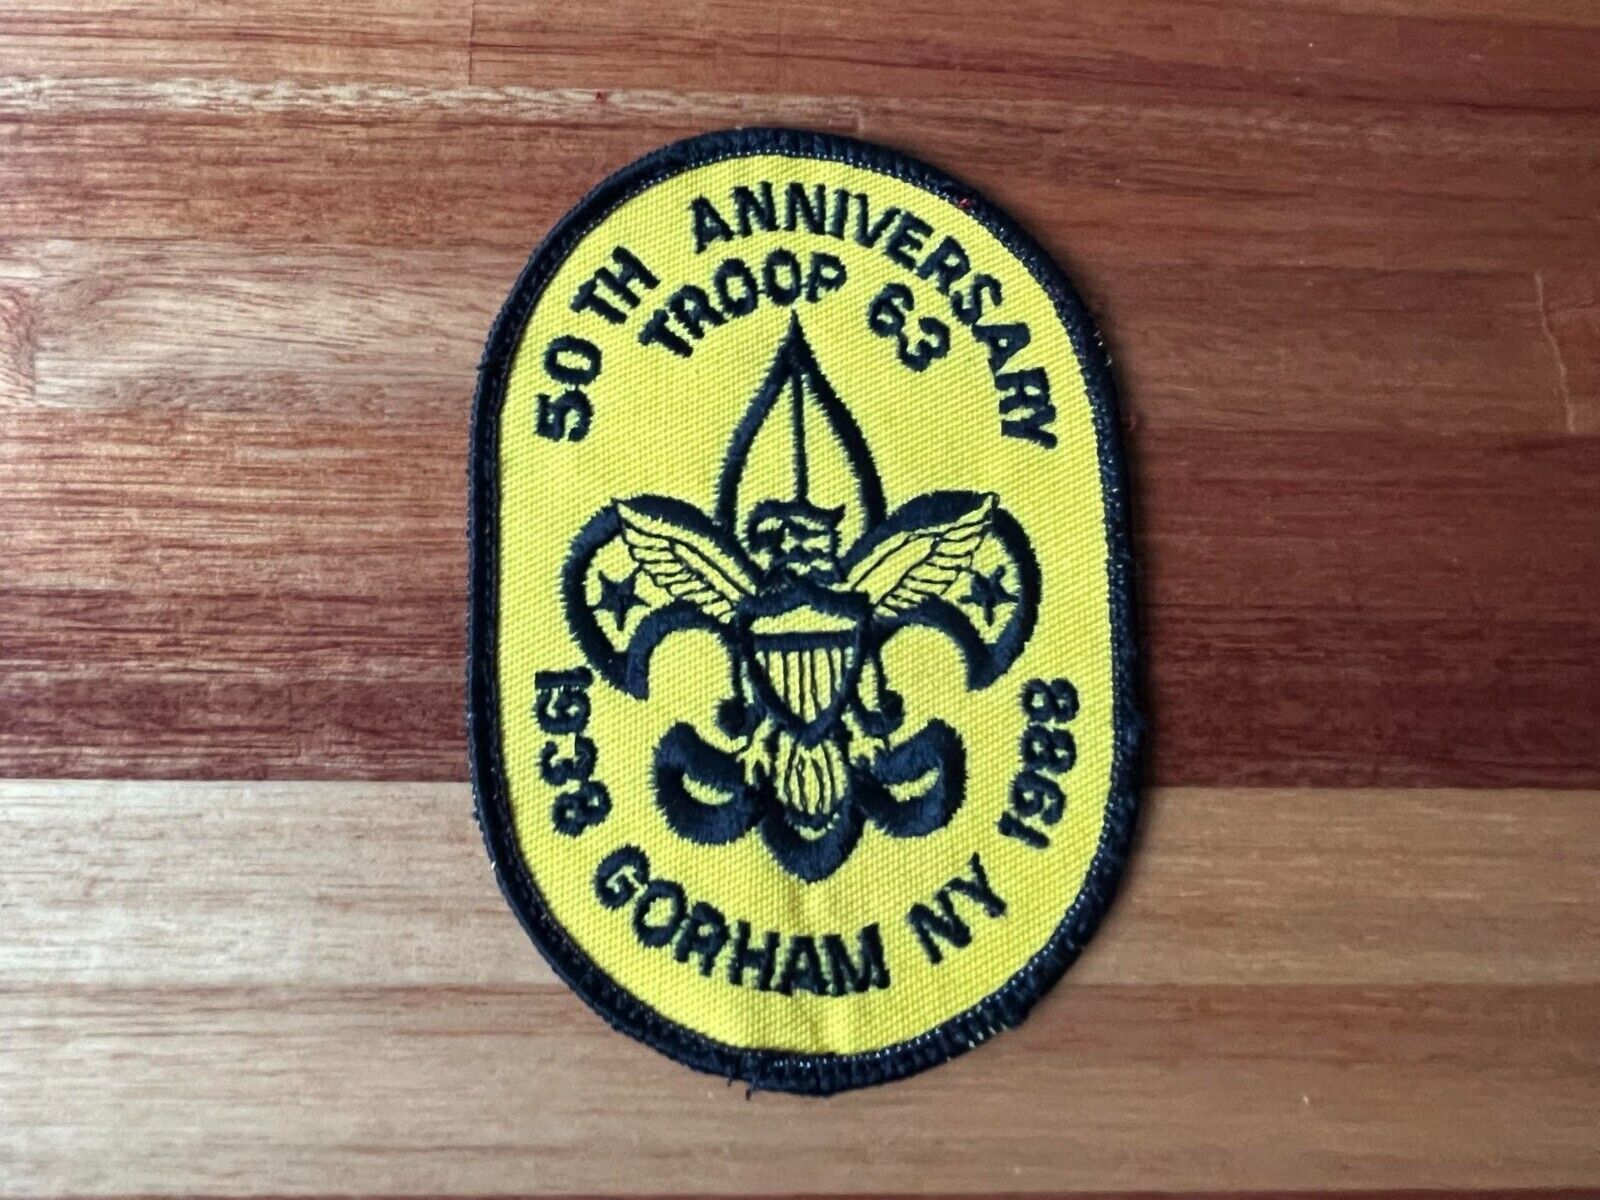 Orig BOY SCOUTS patch 50th Anniversary TROOP 63 GORHAM NY 1938-1988 - Used